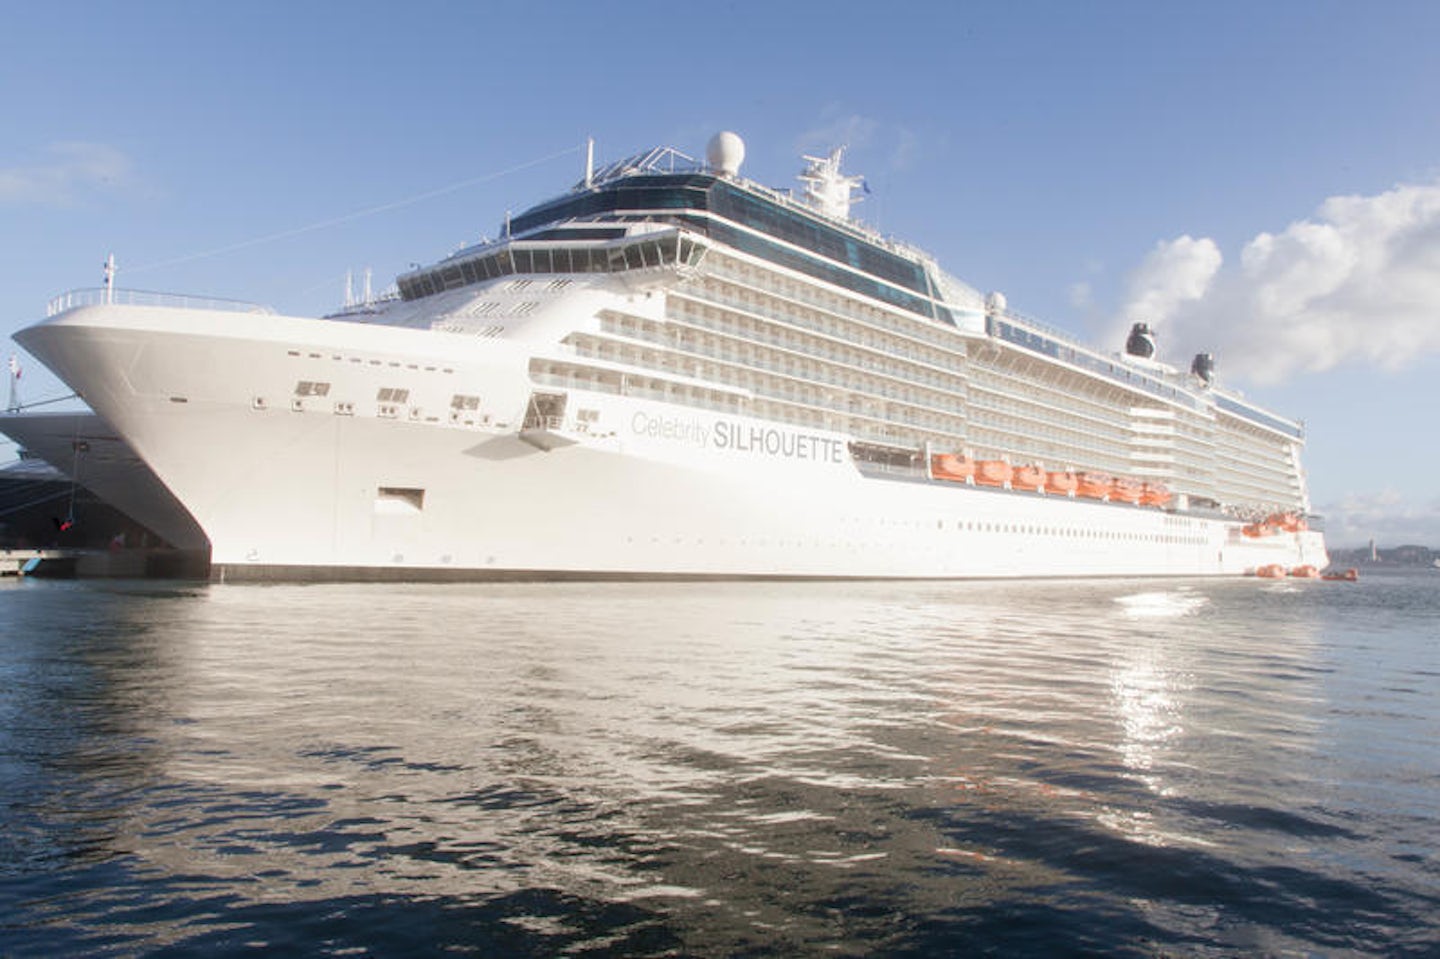 Exterior on Celebrity Silhouette